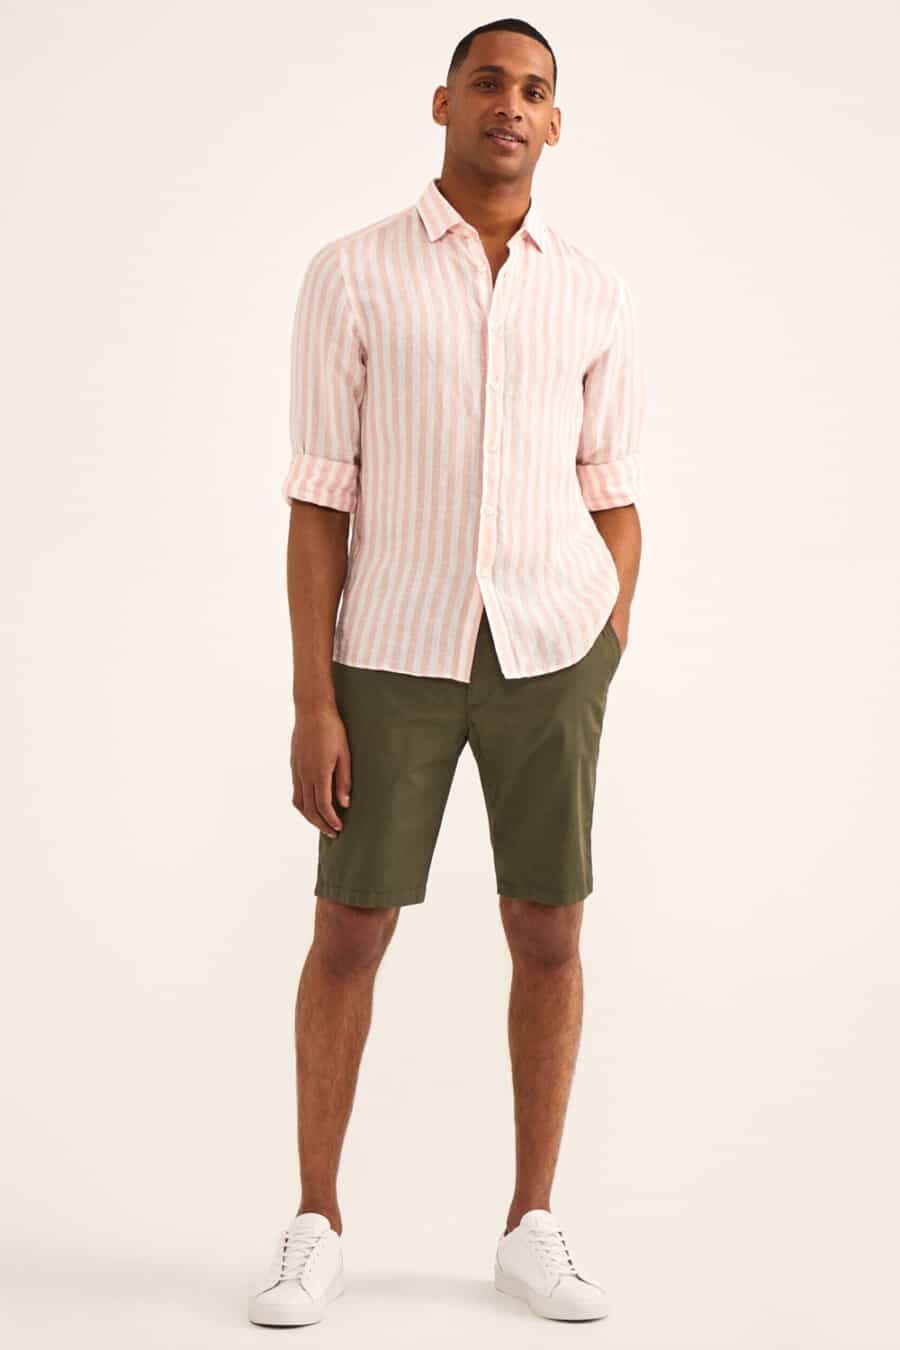 Men's dark green shorts, light pink striped shirt and white sneakers outfit